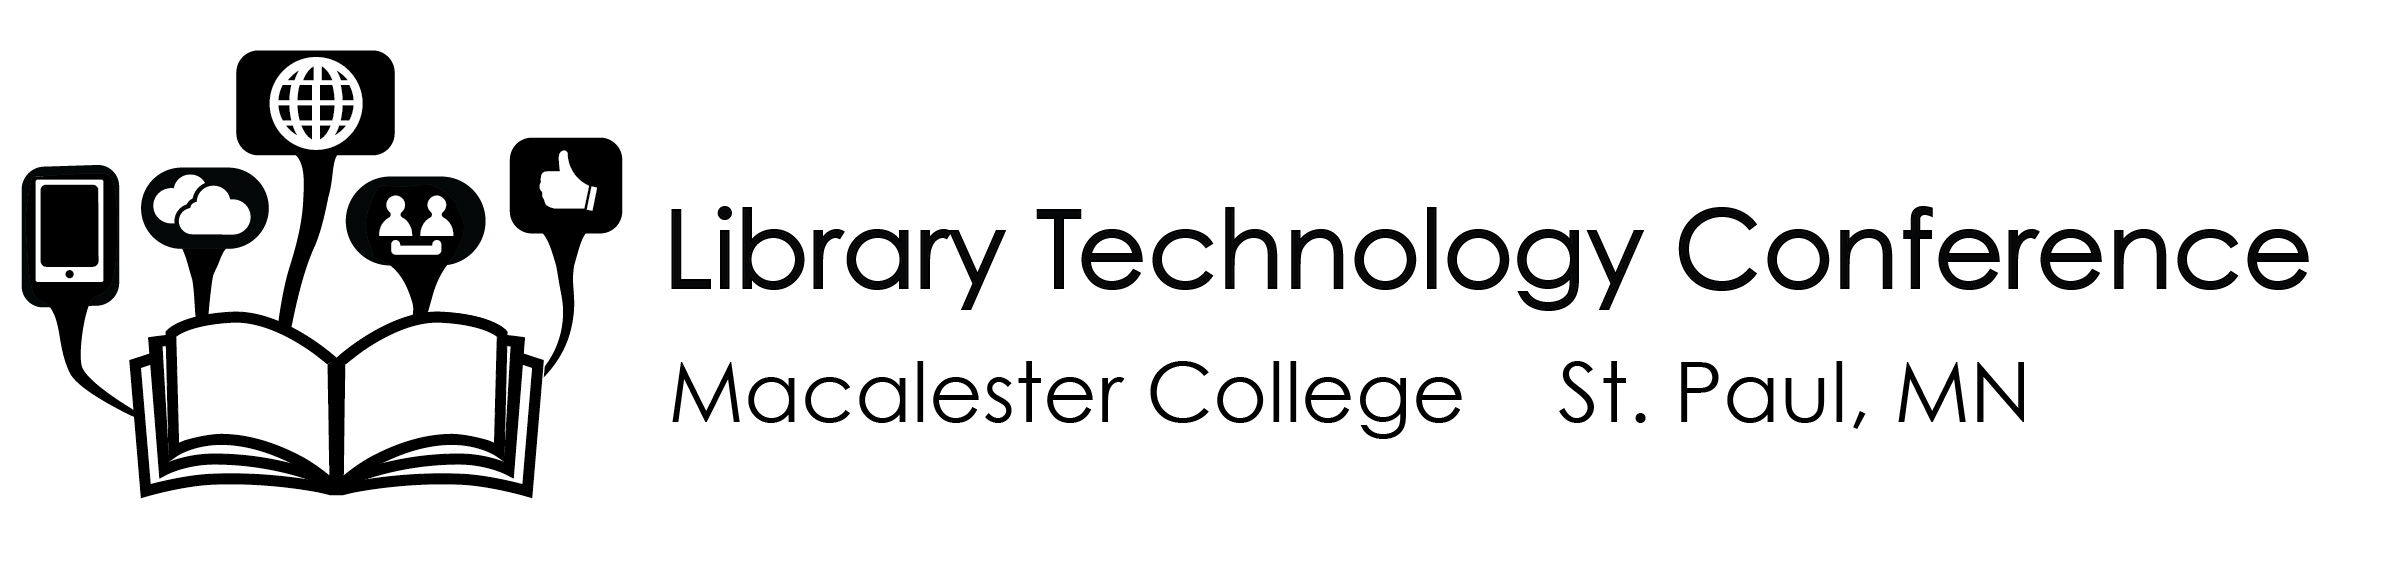 Library Technology Conference 2016